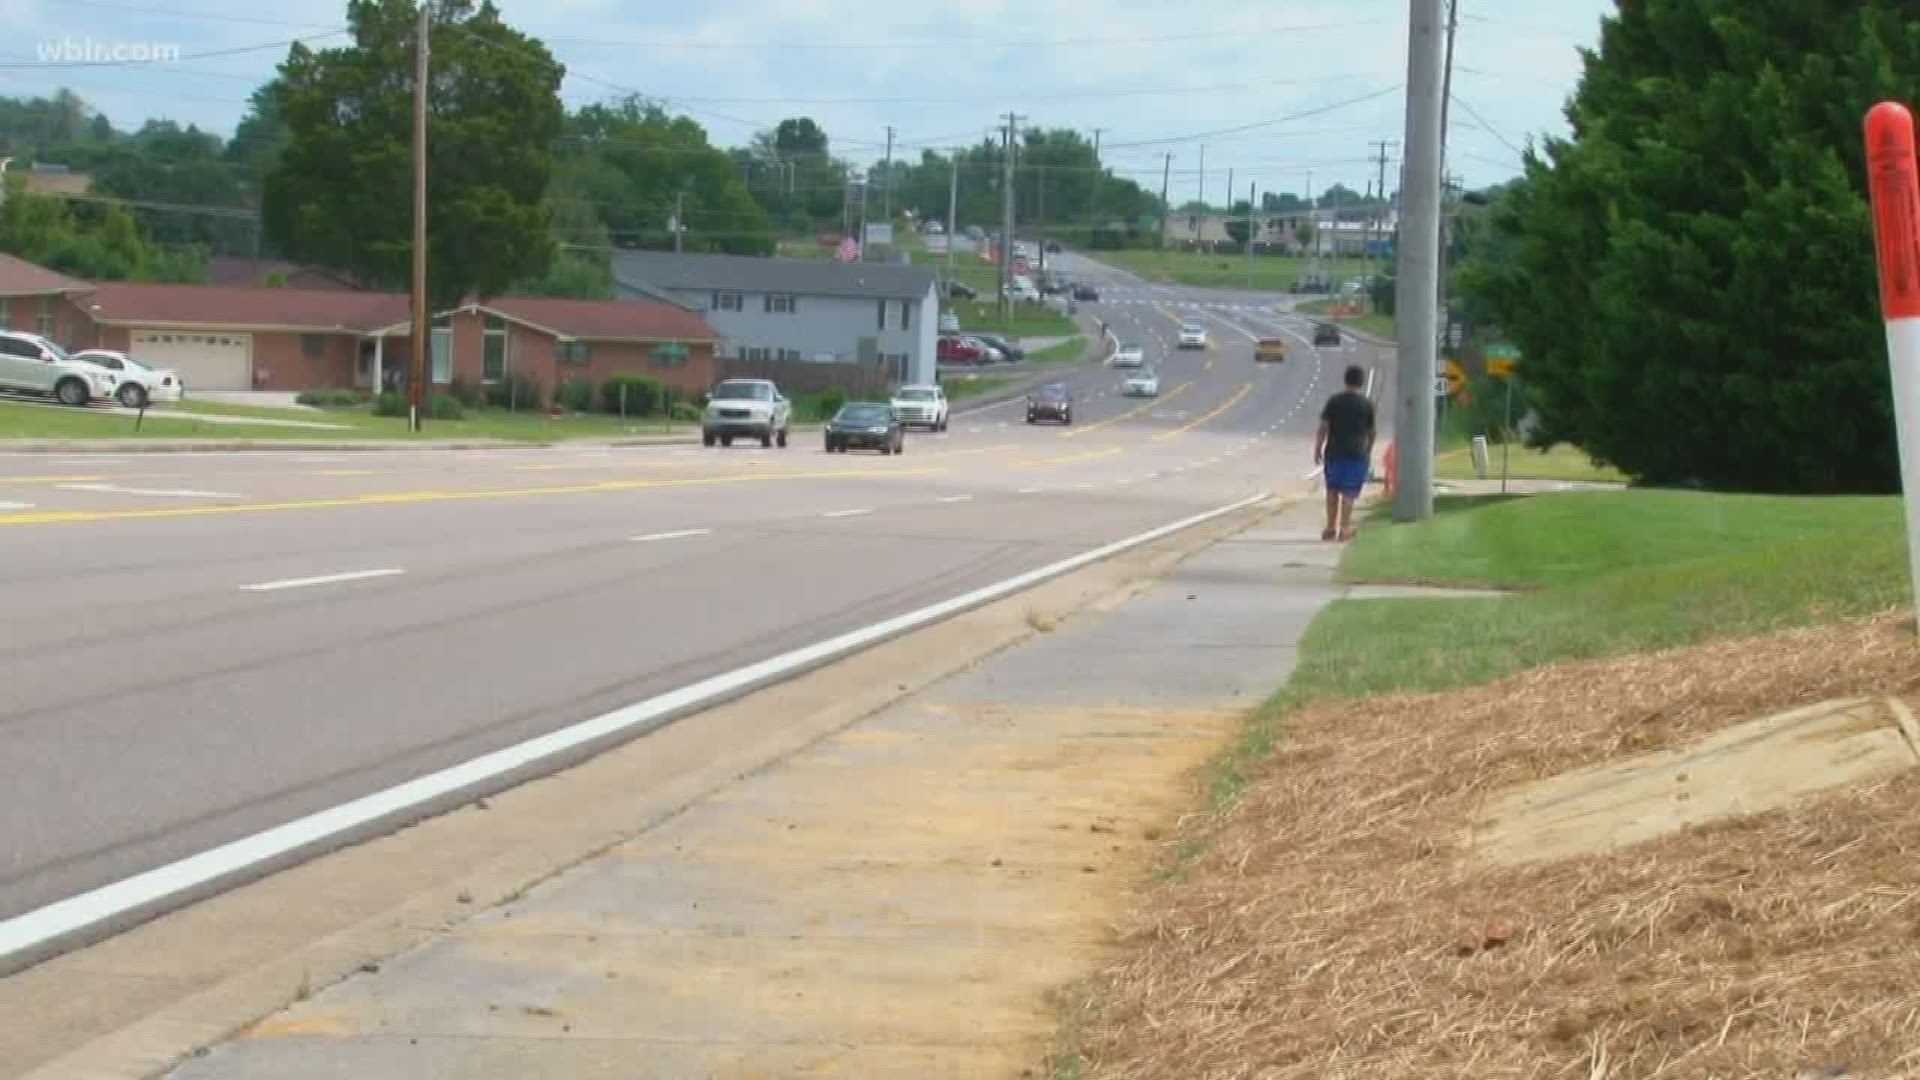 A Knox County mother is concerned about her son's mile-long walk to school after she learned he is no longer eligible for the bus.